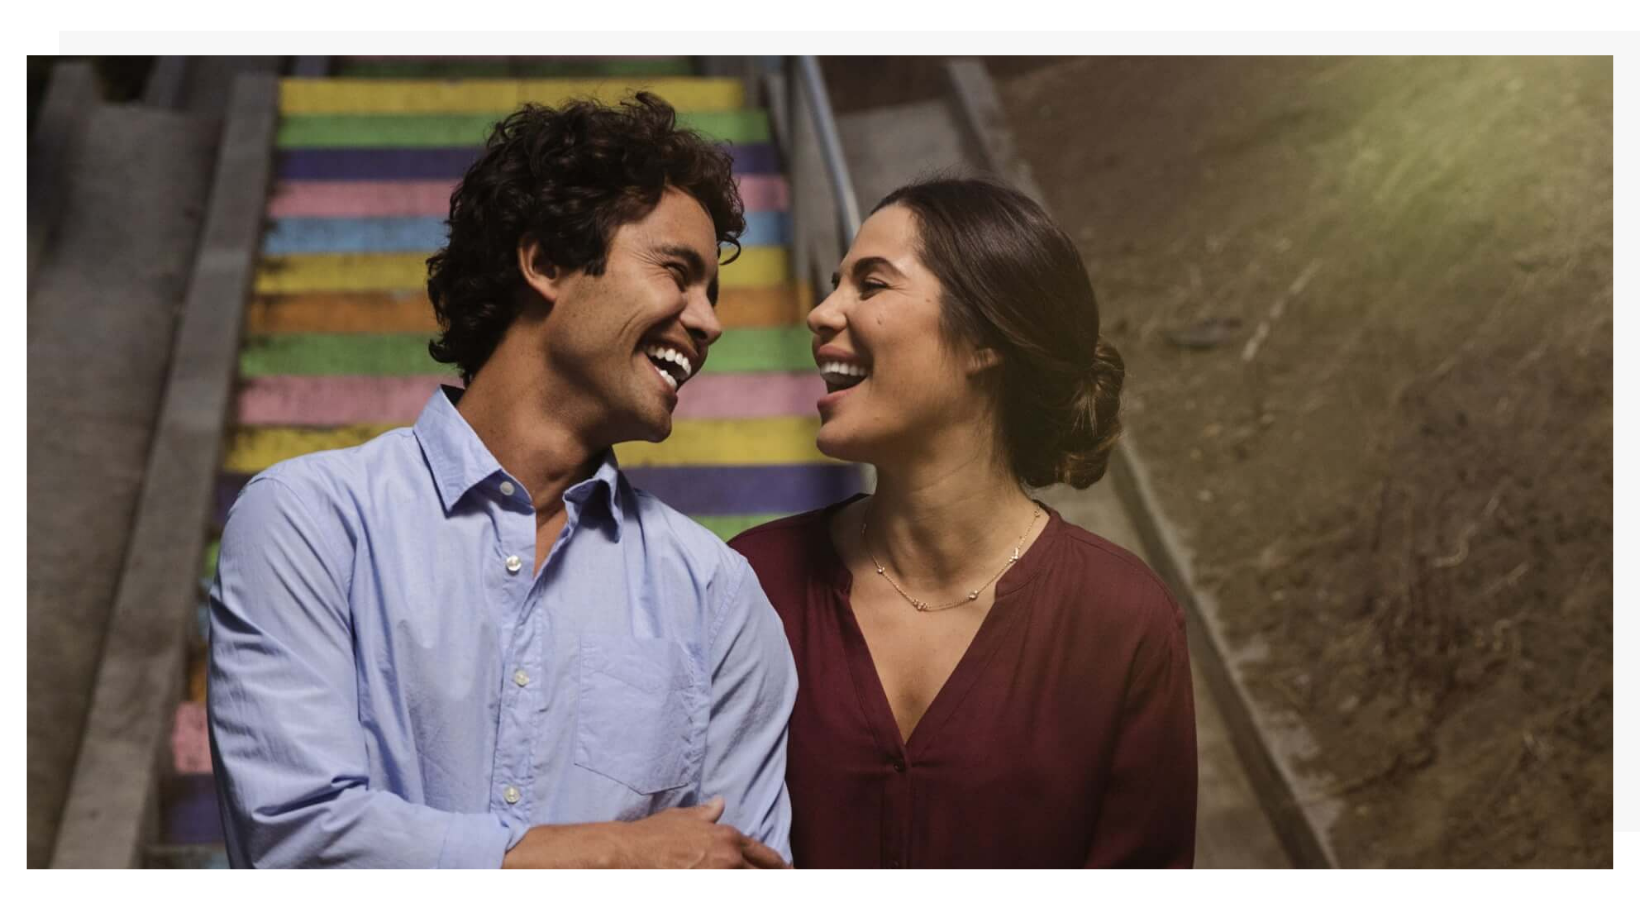 Invisalign Costs might surprise you - couple smiling